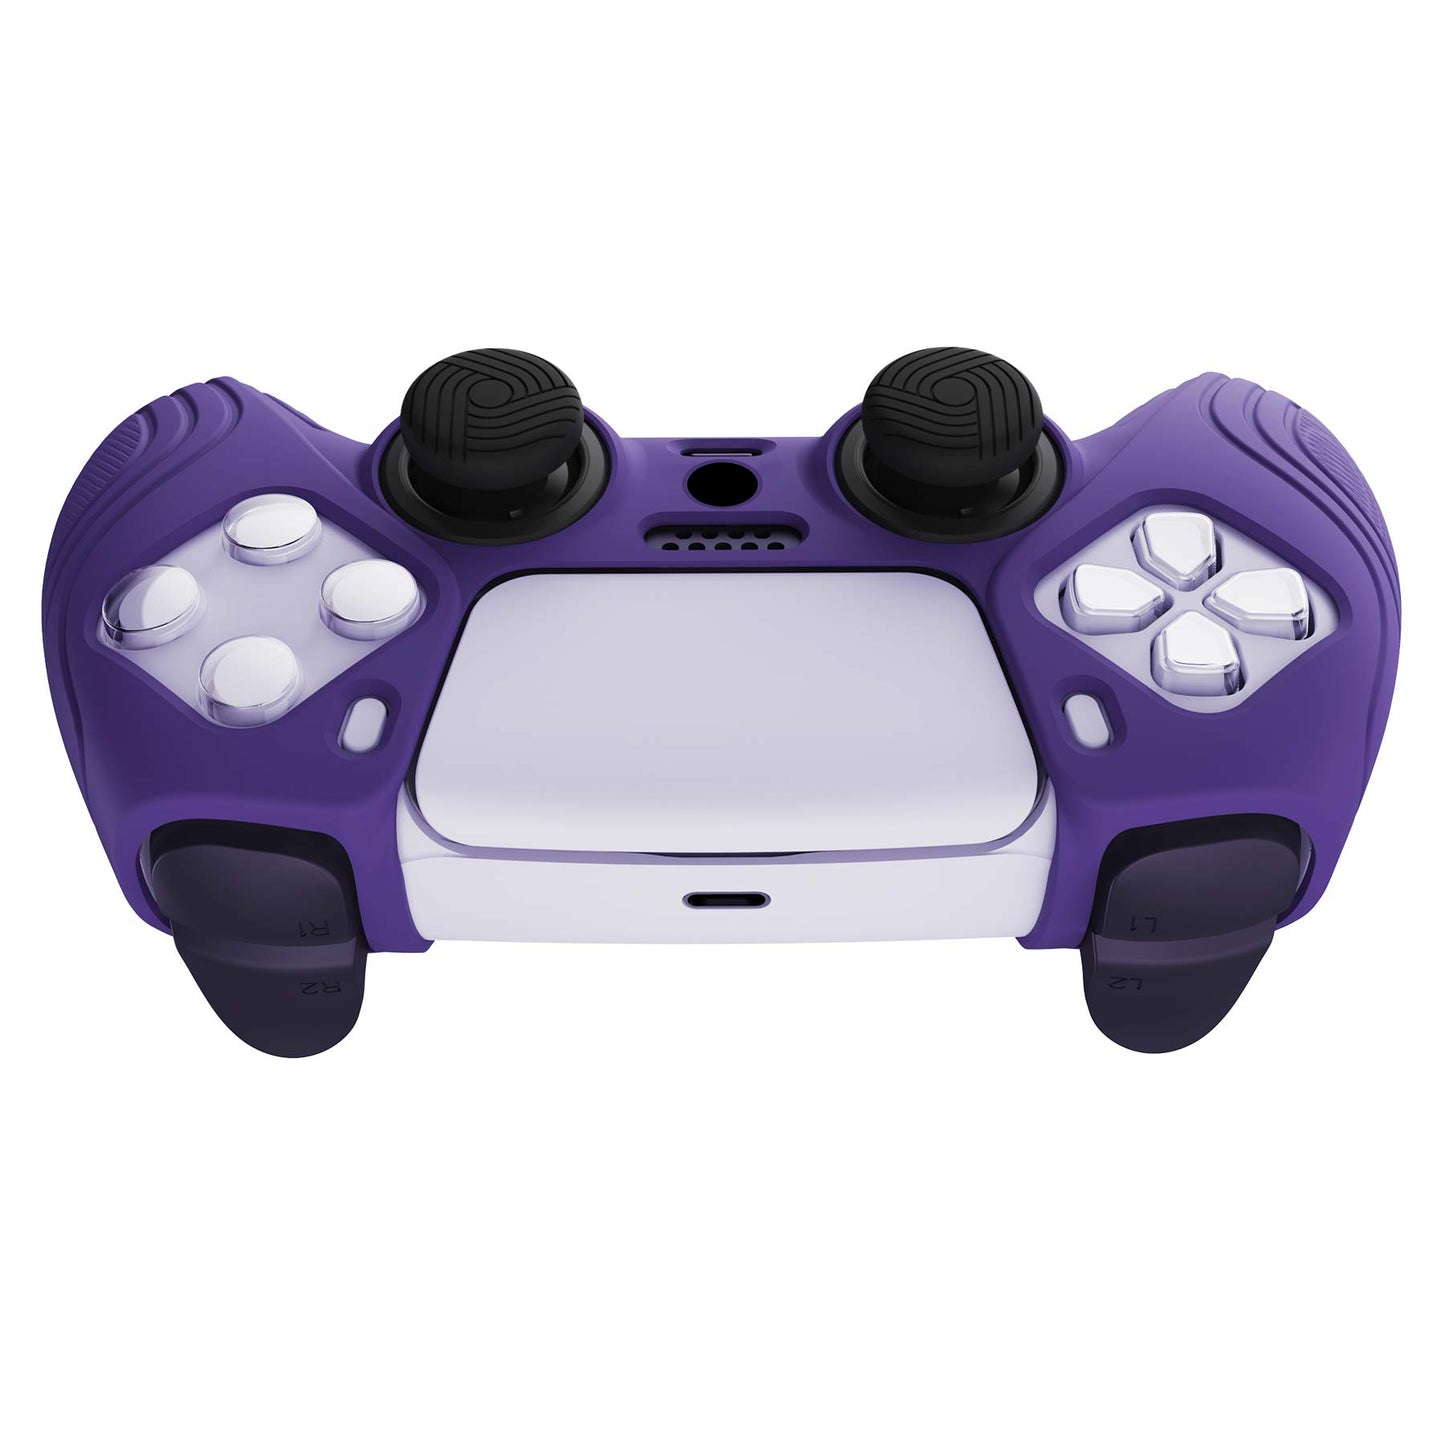 PlayVital Samurai Edition Anti-Slip Silicone Cover Skin with Thumb Grip Caps for PS5 Wireless Controller - Purple - BWPF007 PlayVital